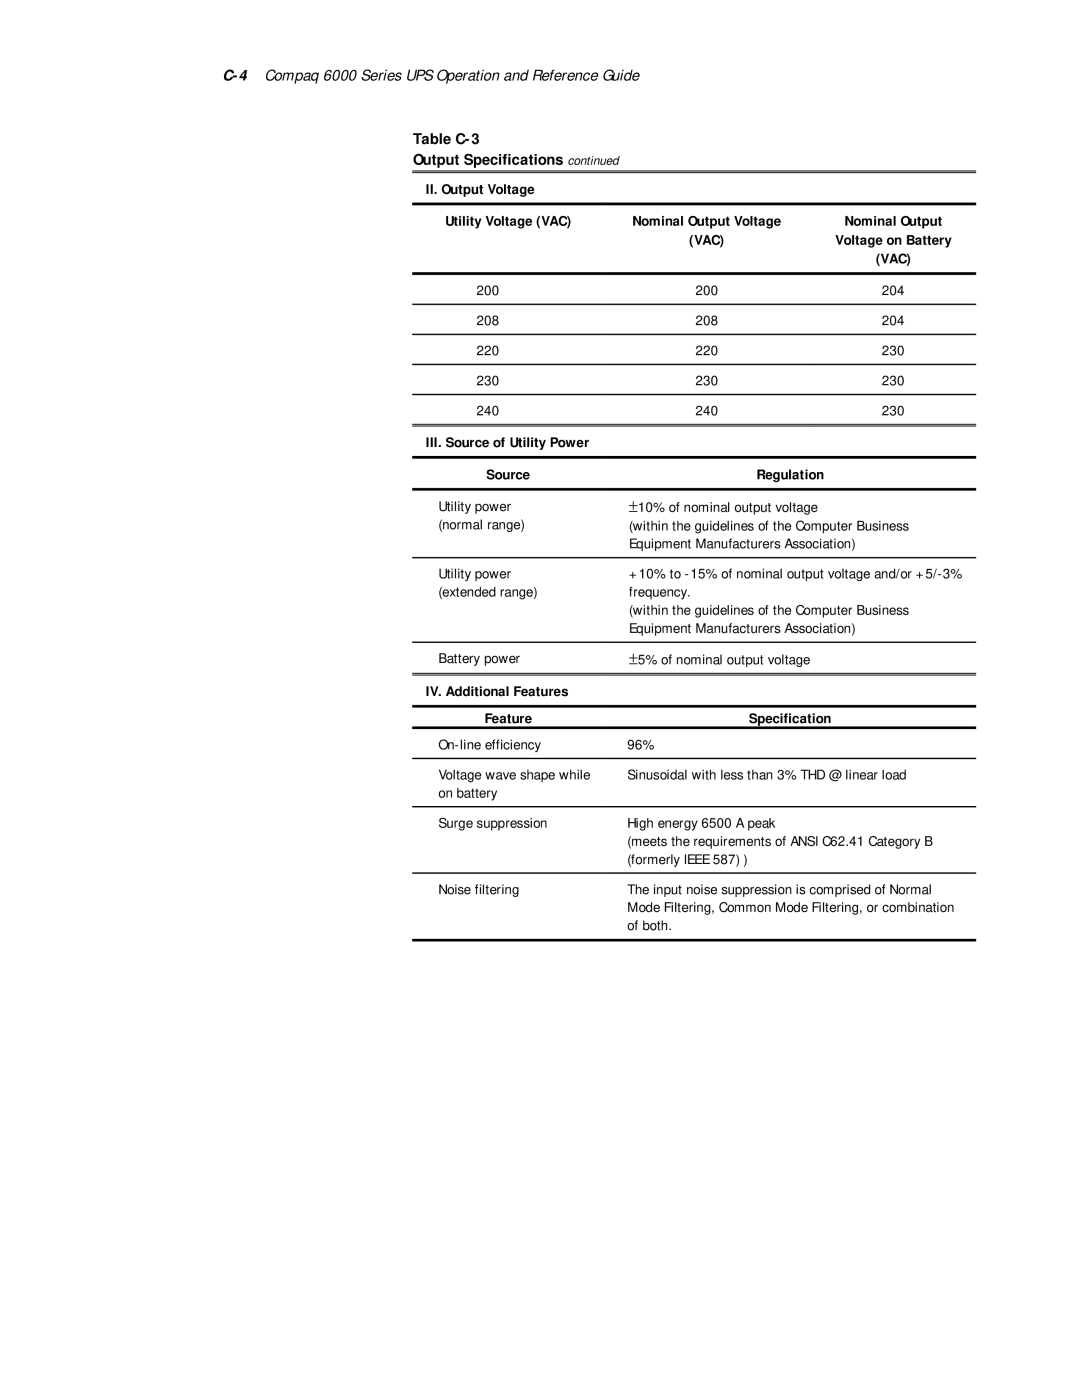 Compaq R6000 Series C-4 Compaq 6000 Series UPS Operation and Reference Guide, Table C-3 Output Specifications continued 